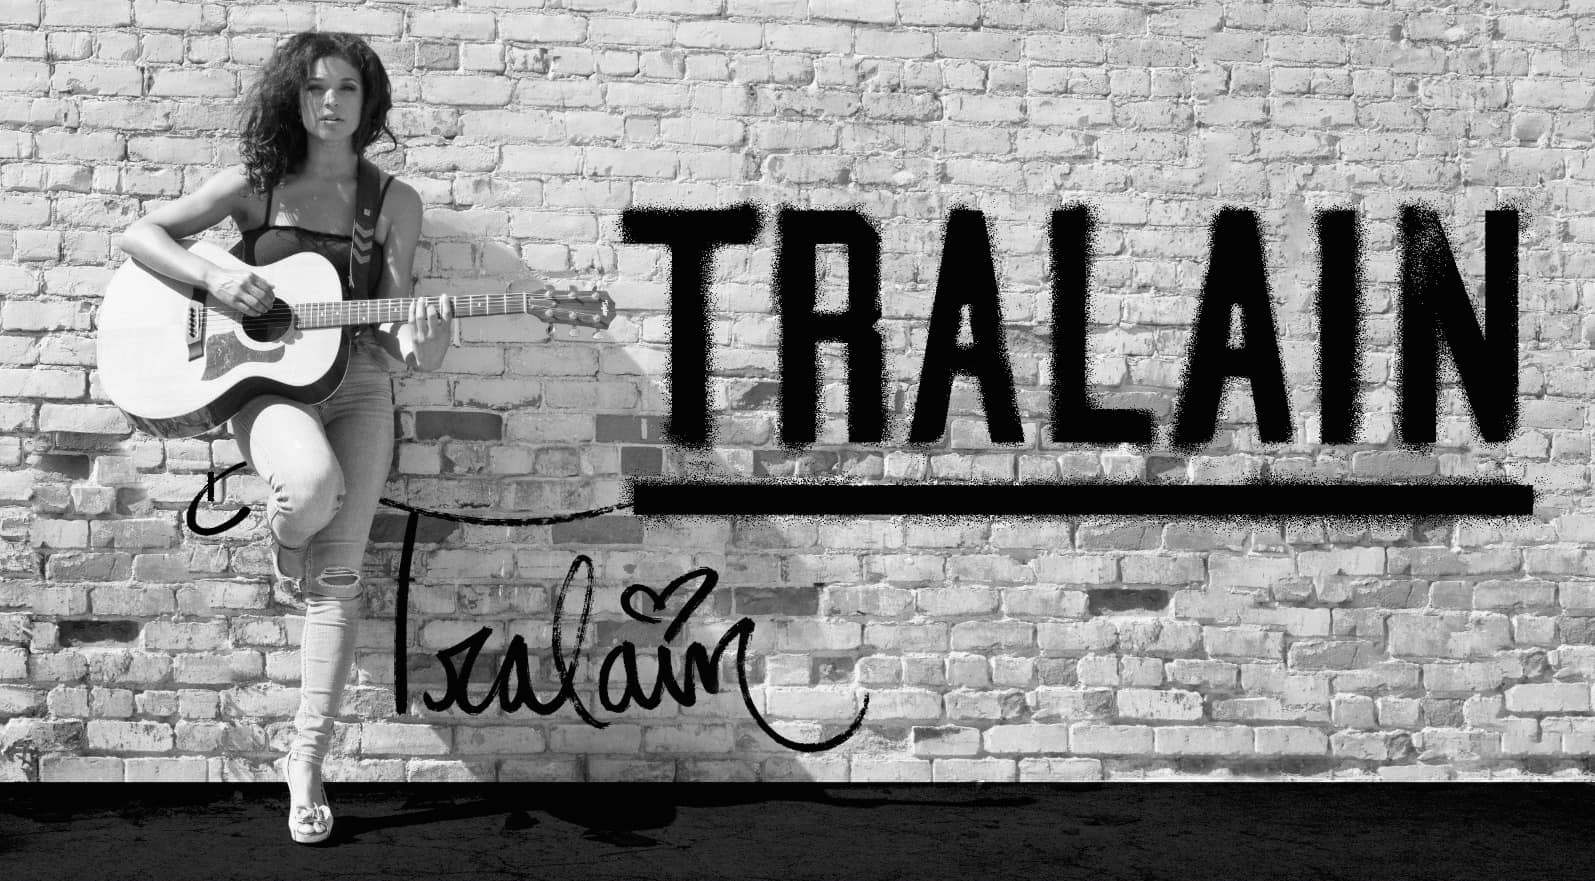 Tralain with Acoustic Guitar